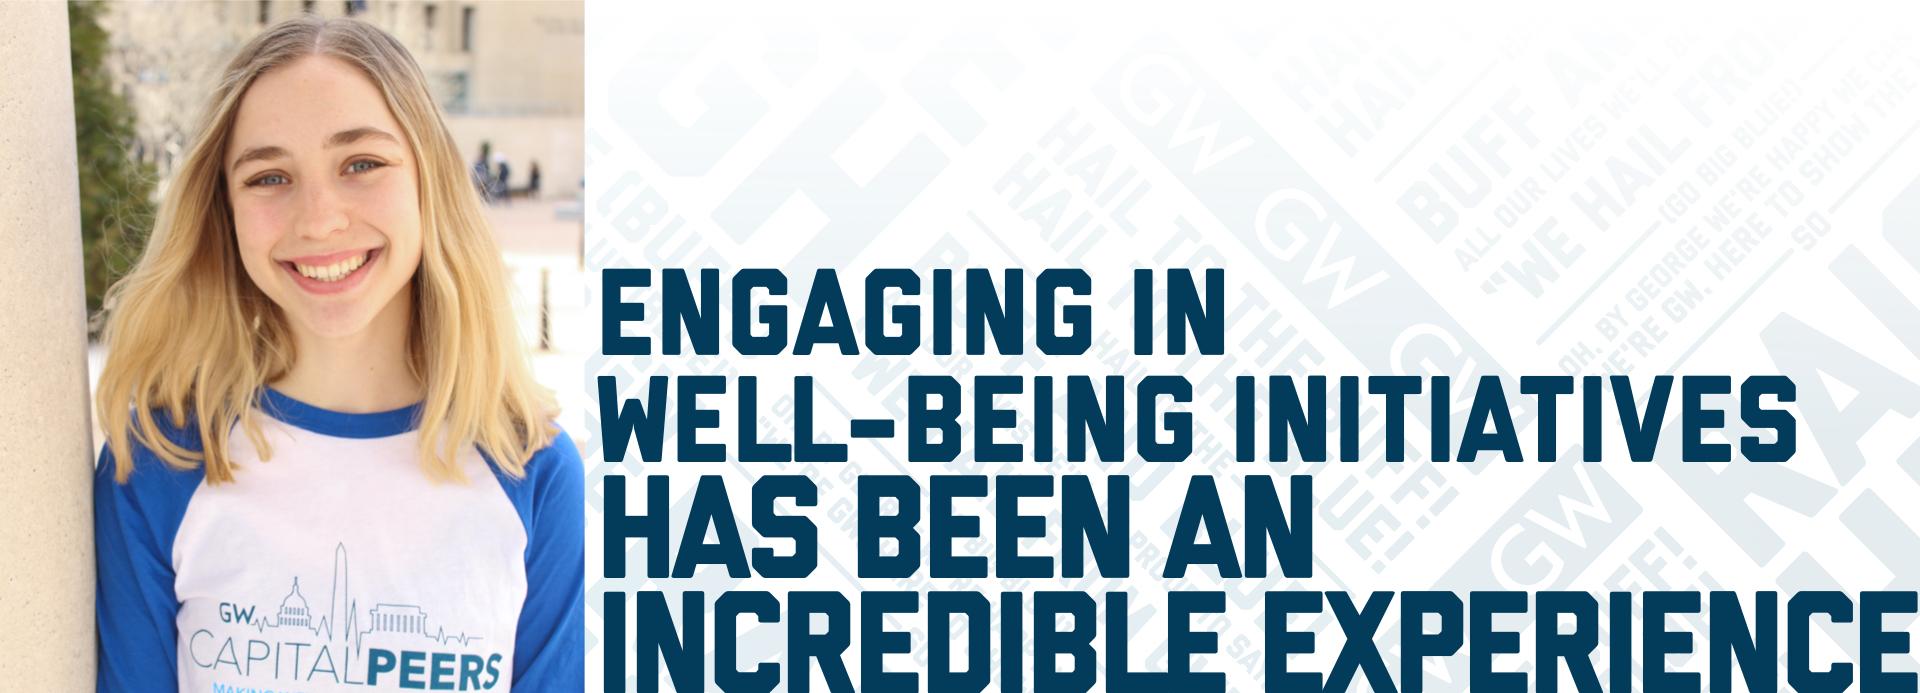 Engaging in Well-being Initiatives has been an incredible experience